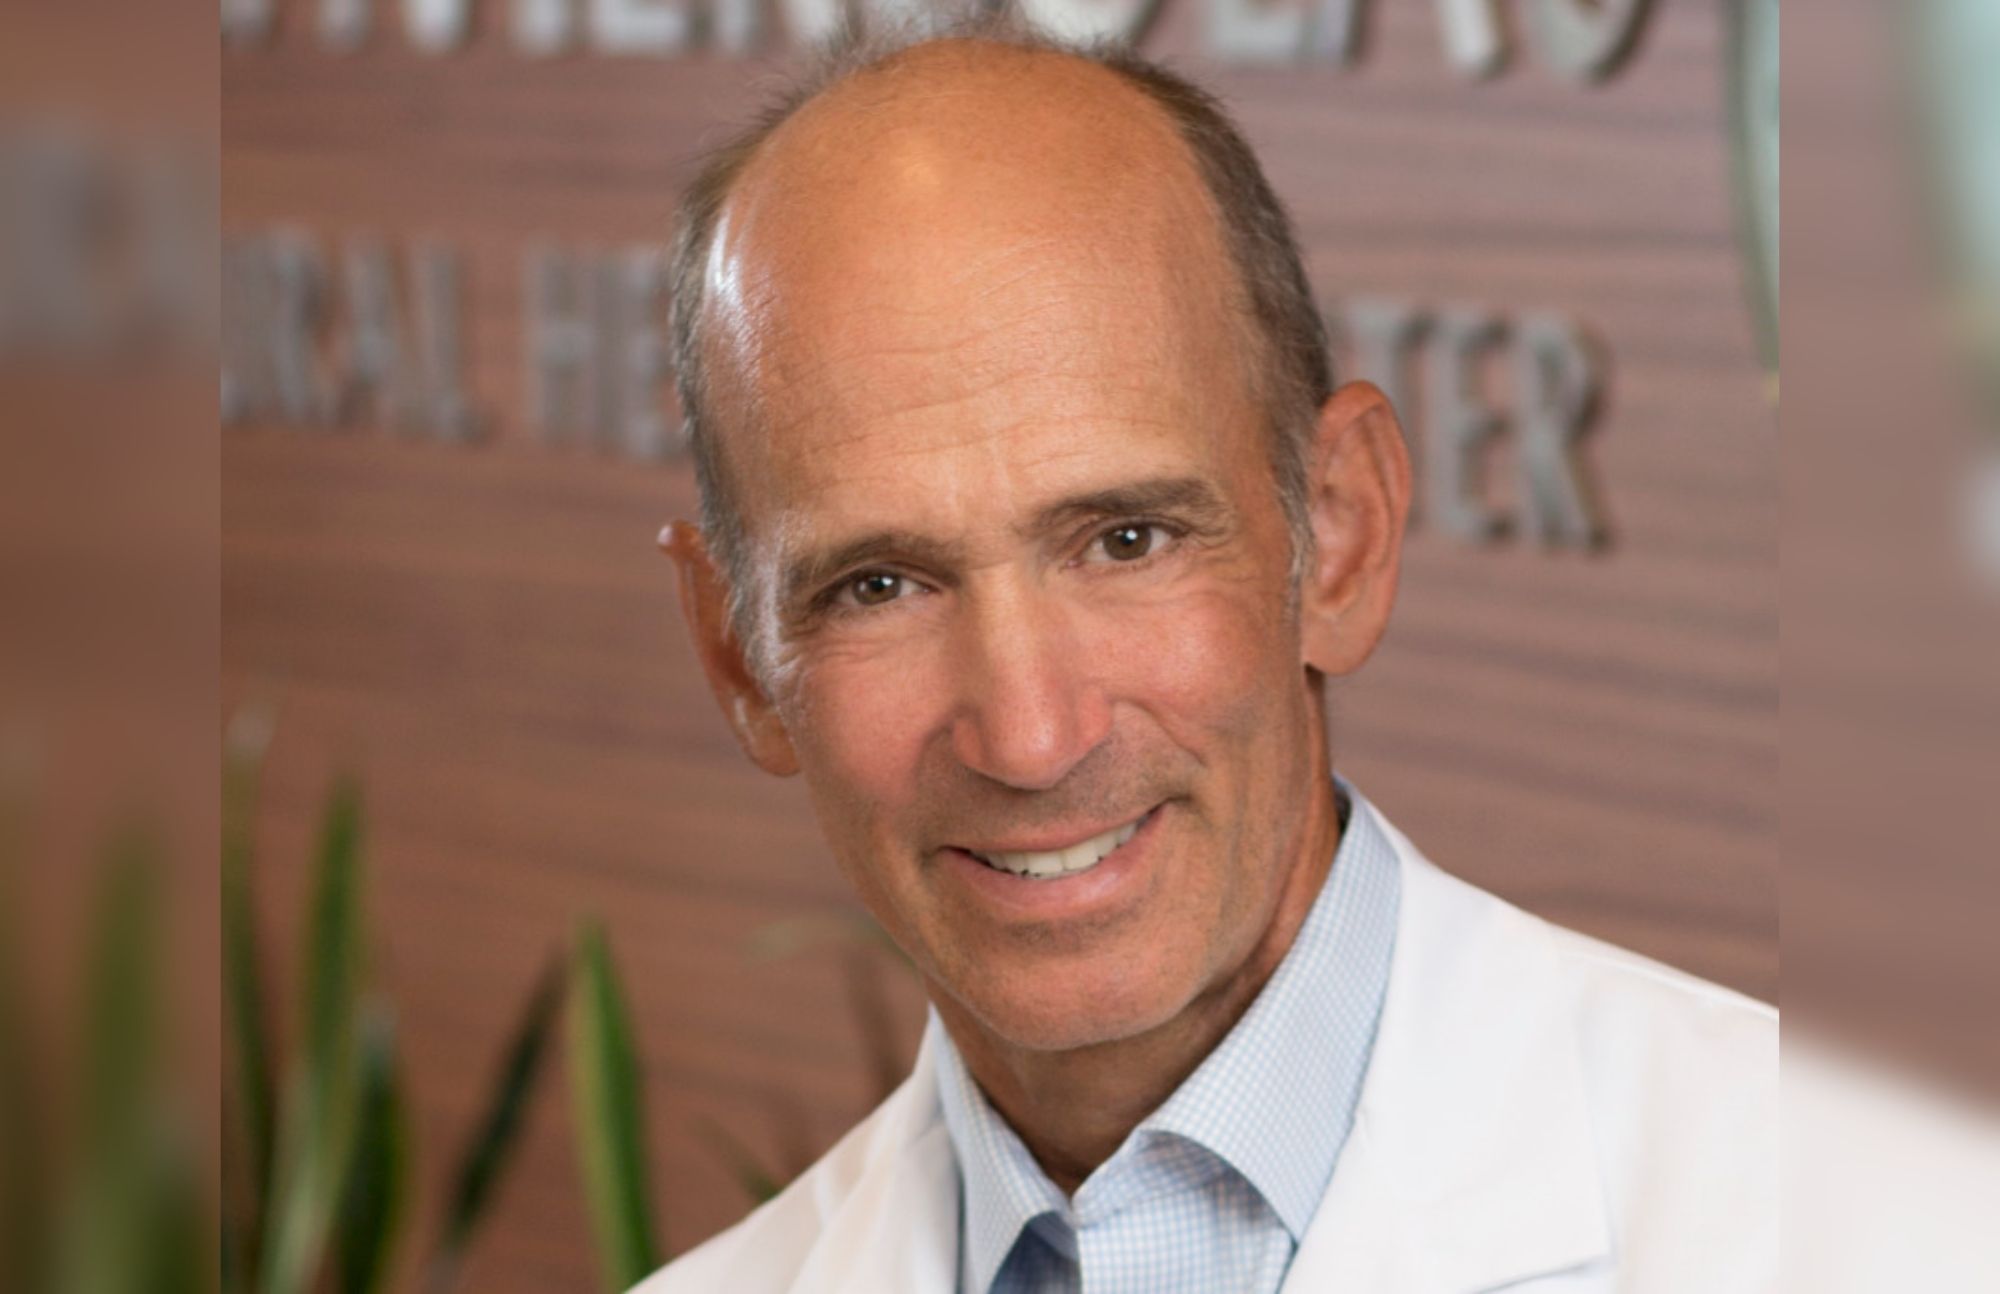 Dr. Joseph Mercola wearing a laboratory gown and is smiling at the camera